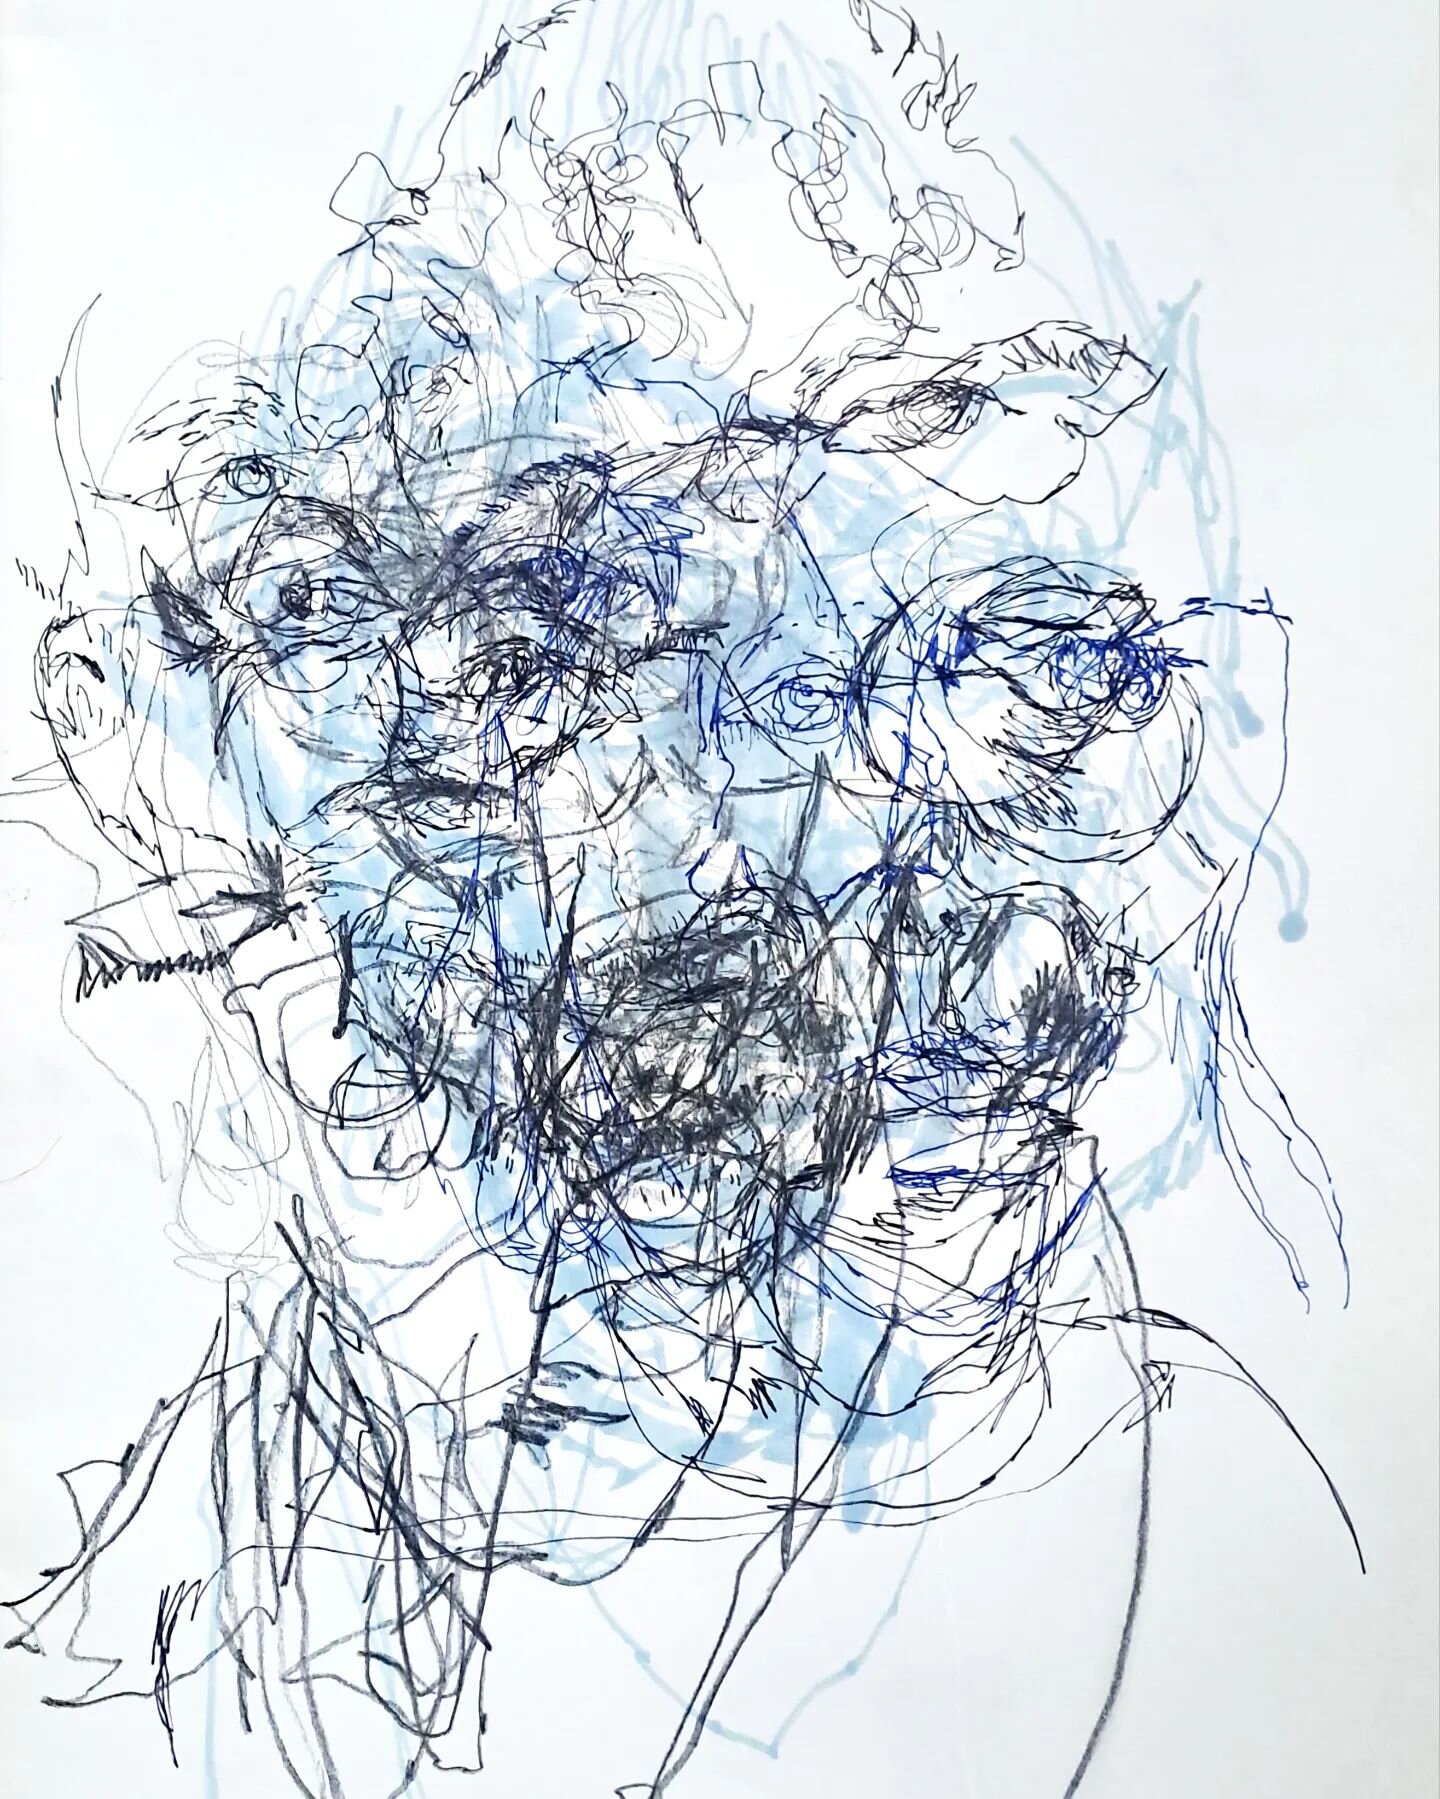 Multi-layered blind drawings from a drawing session with Chloe Briggs @drawingisfree_org last Thursday. 
Lots of life changes and adjustments recently, really great to take some time out for an inspiring trip to London to attend the exhibition launch